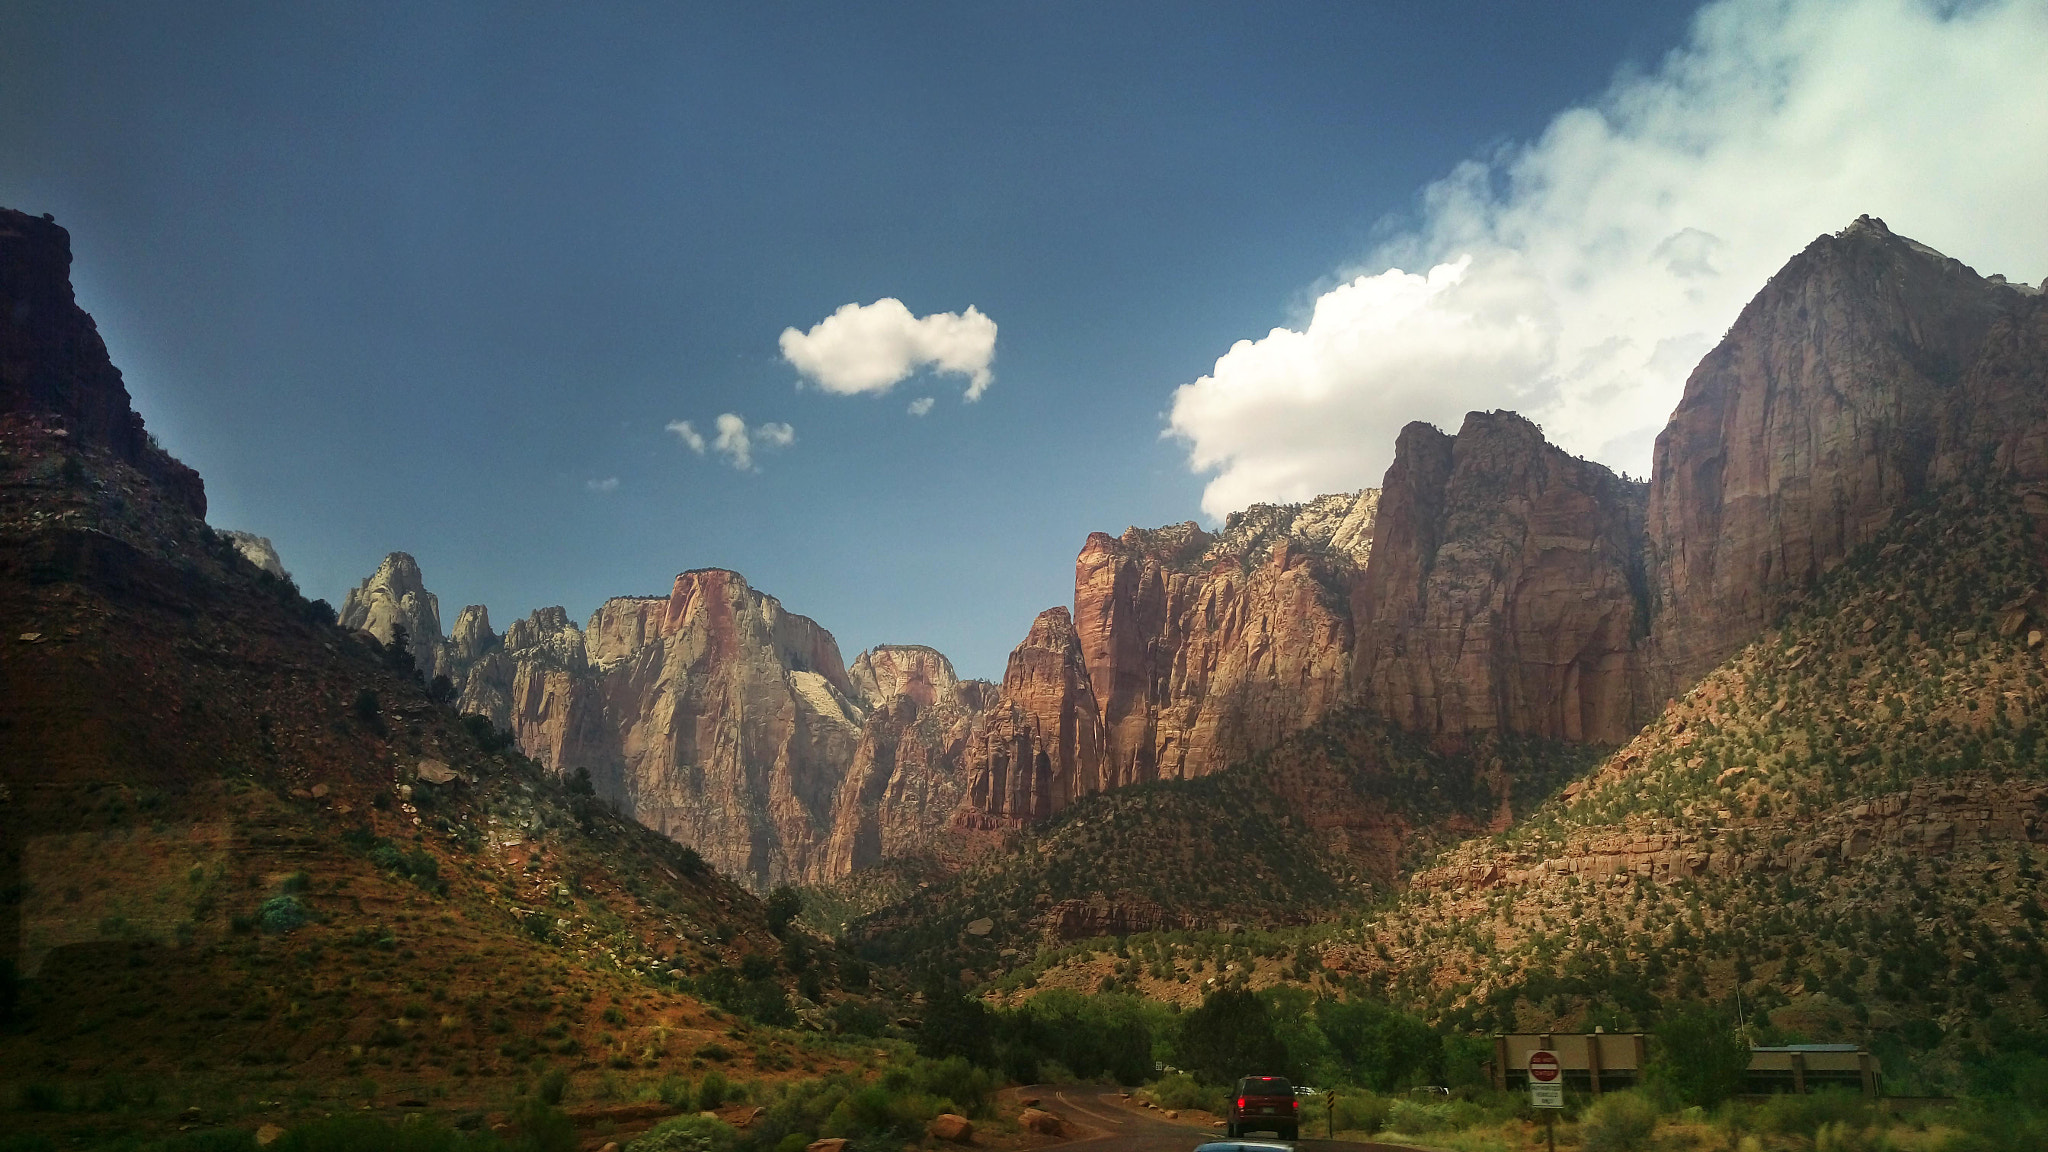 HTC ONE M9+ sample photo. Zion national park photography